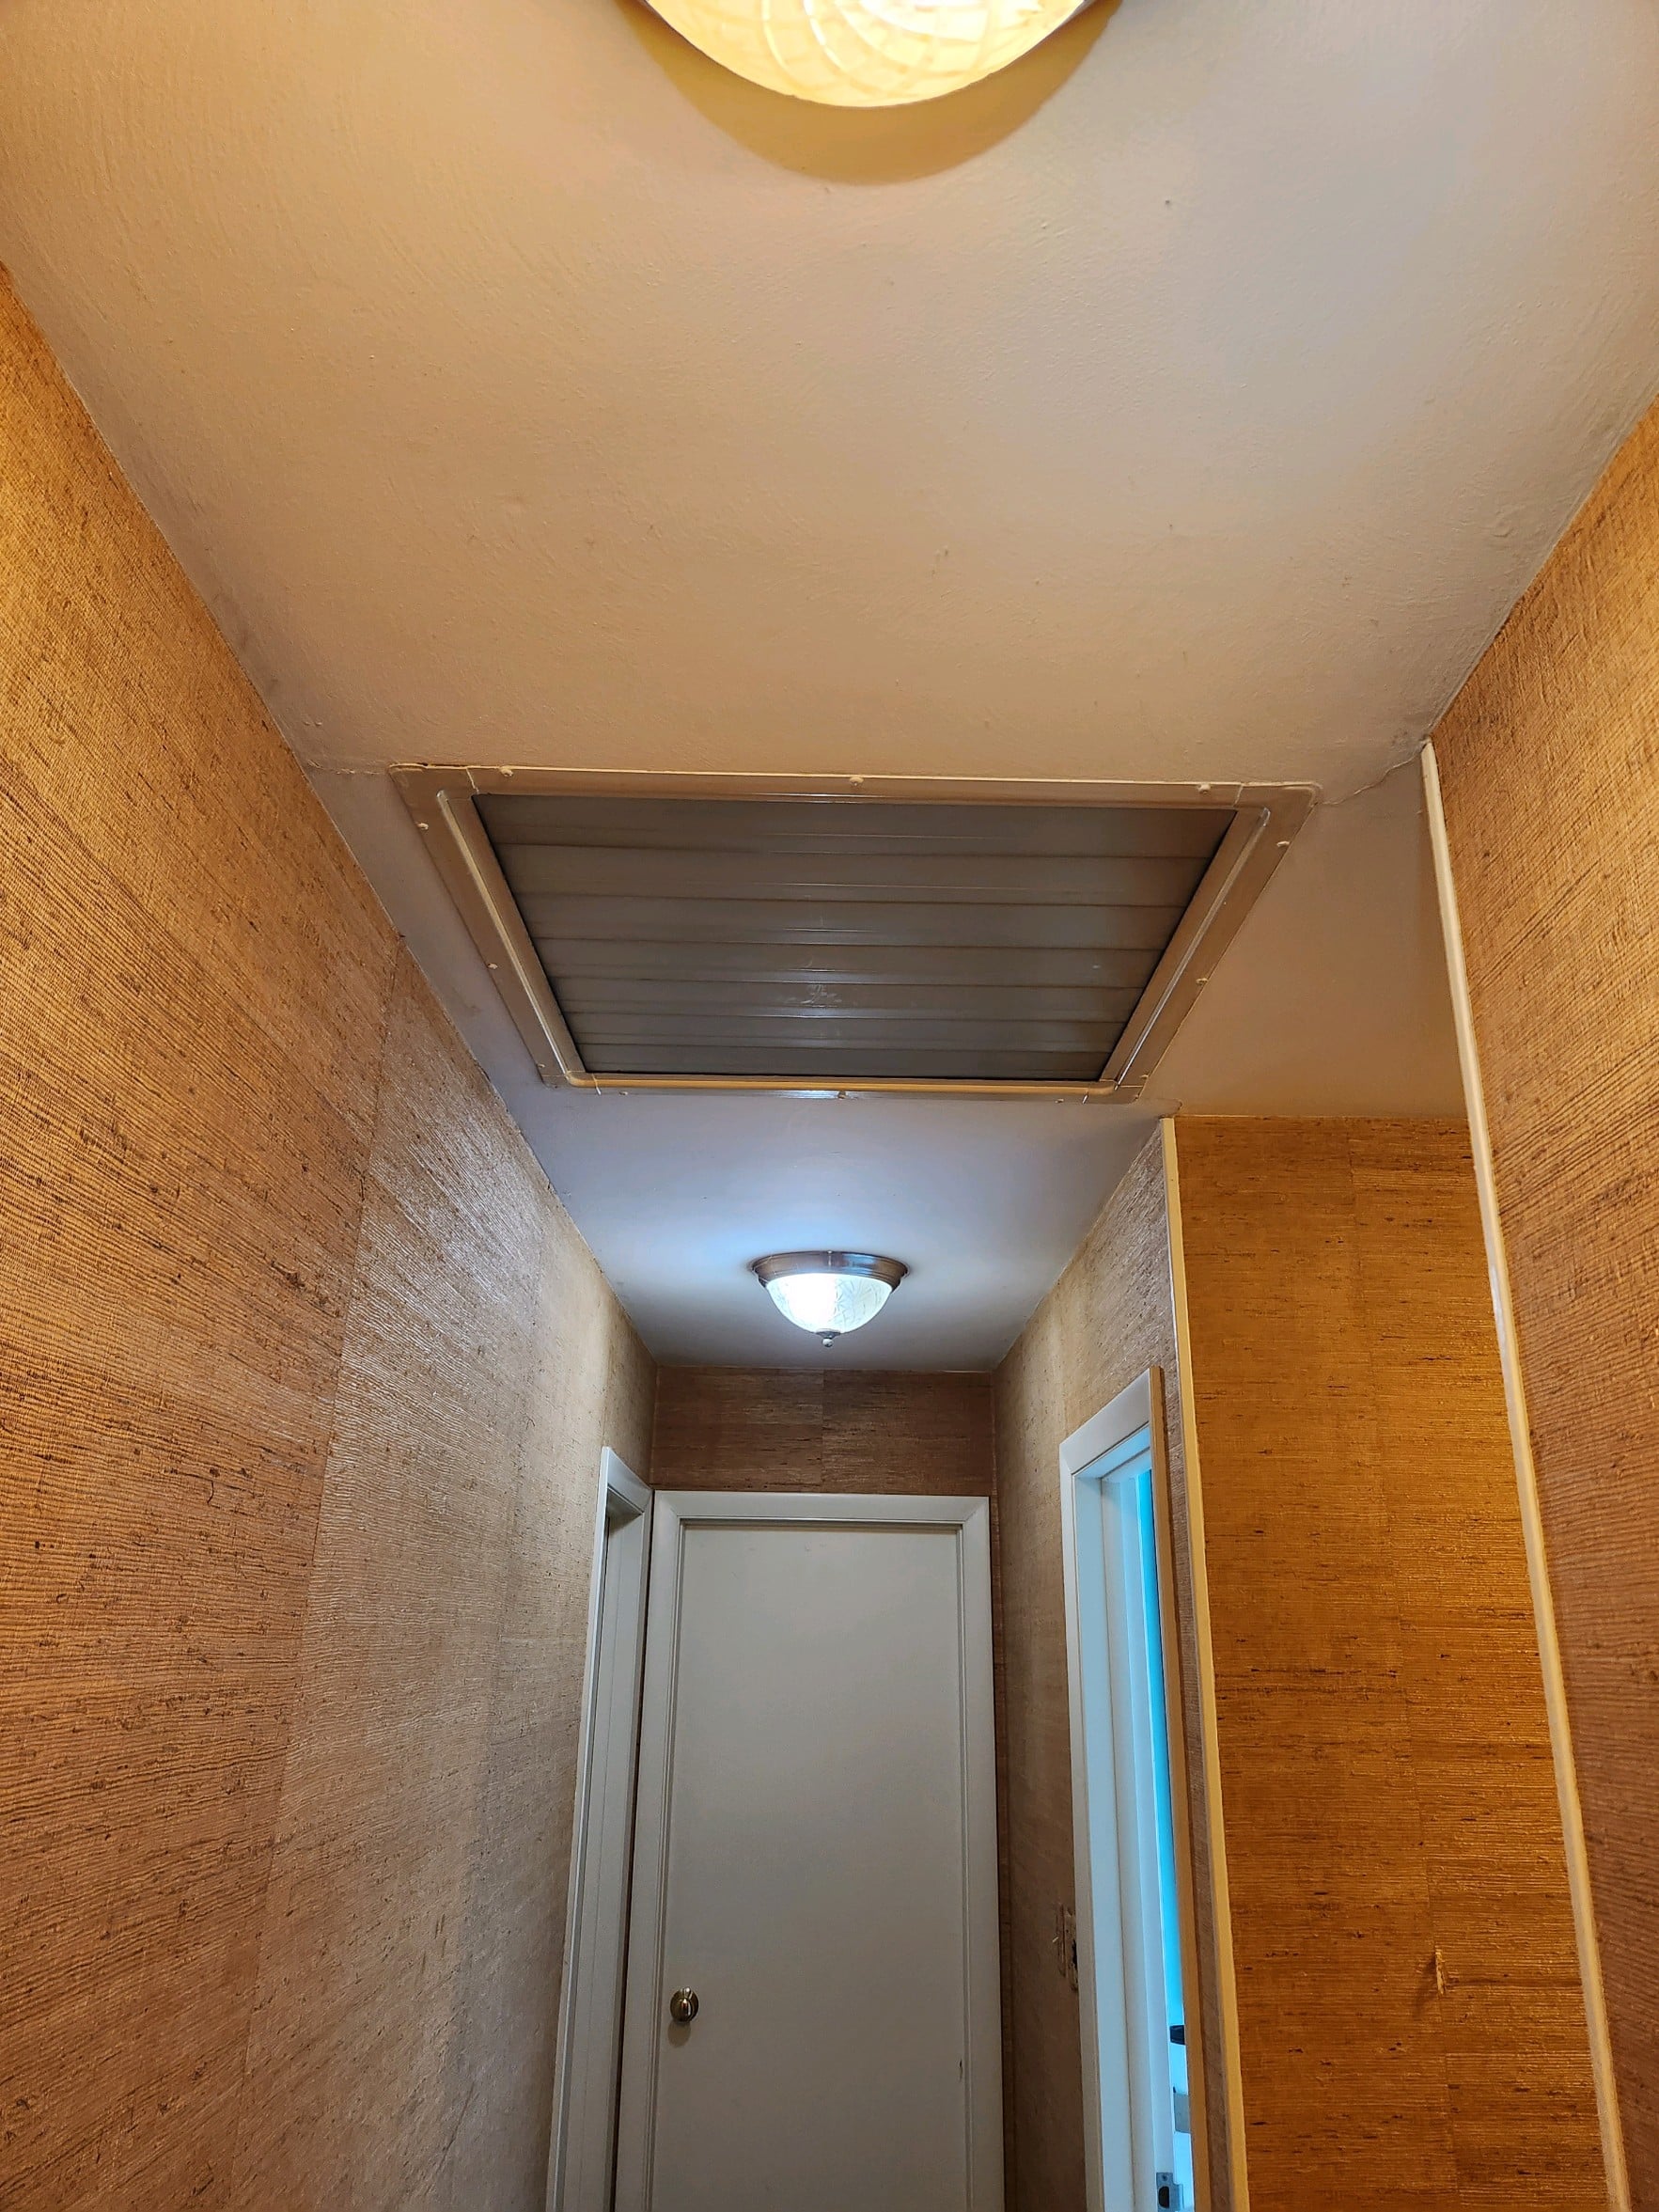 Ceiling of a home's hallway